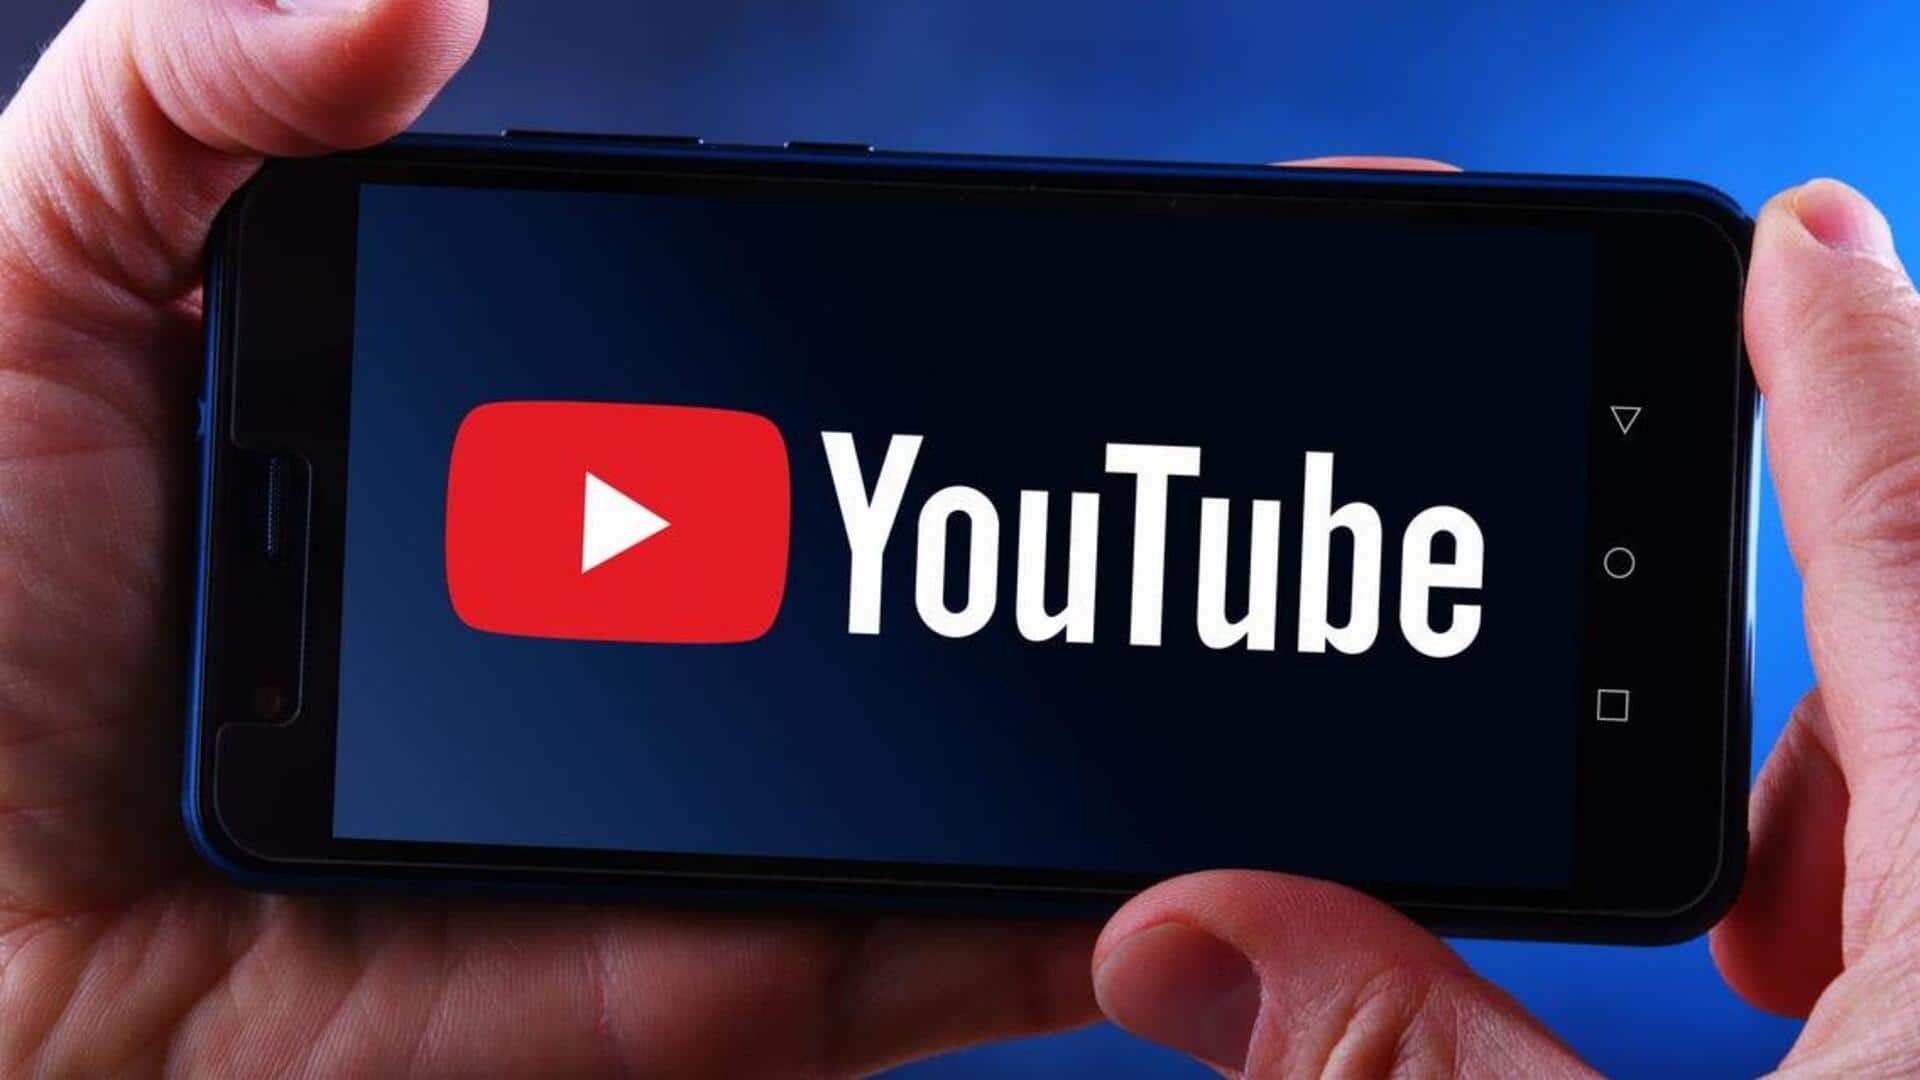 YouTube to prioritize credible first-aid videos in search results